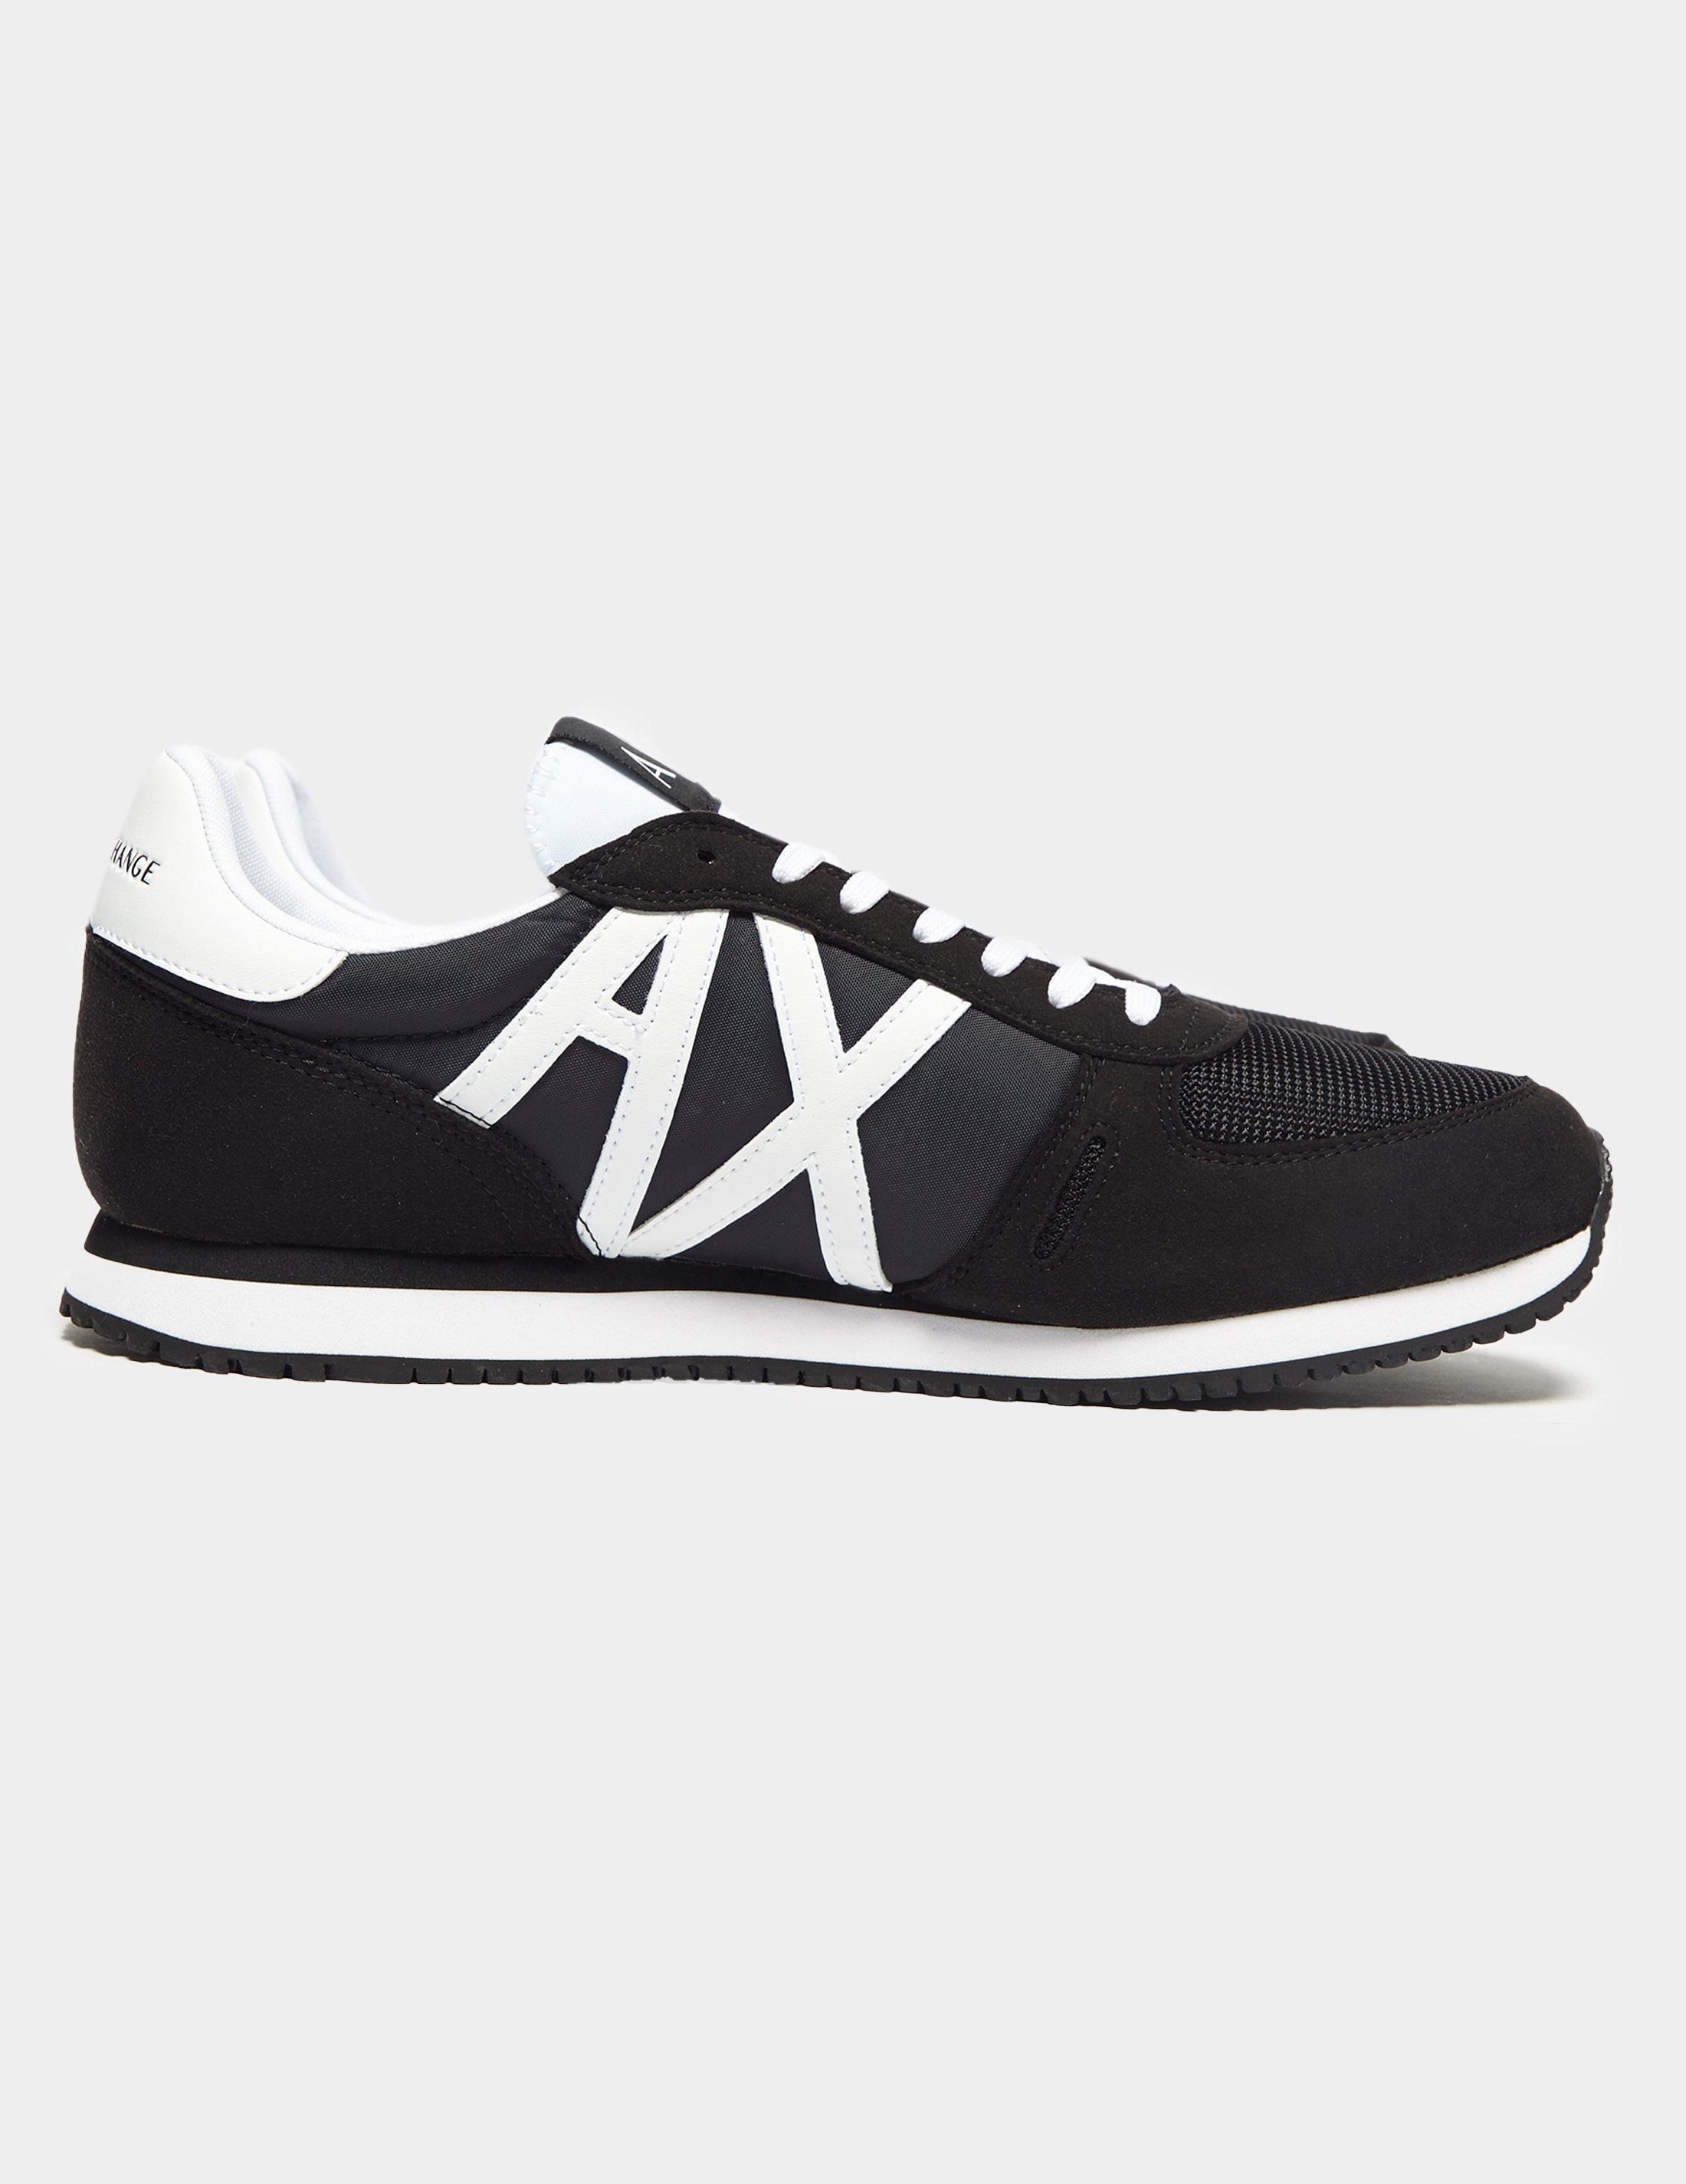 Armani Exchange Lace-up Sneakers in Black/White (Black) for Men - Lyst